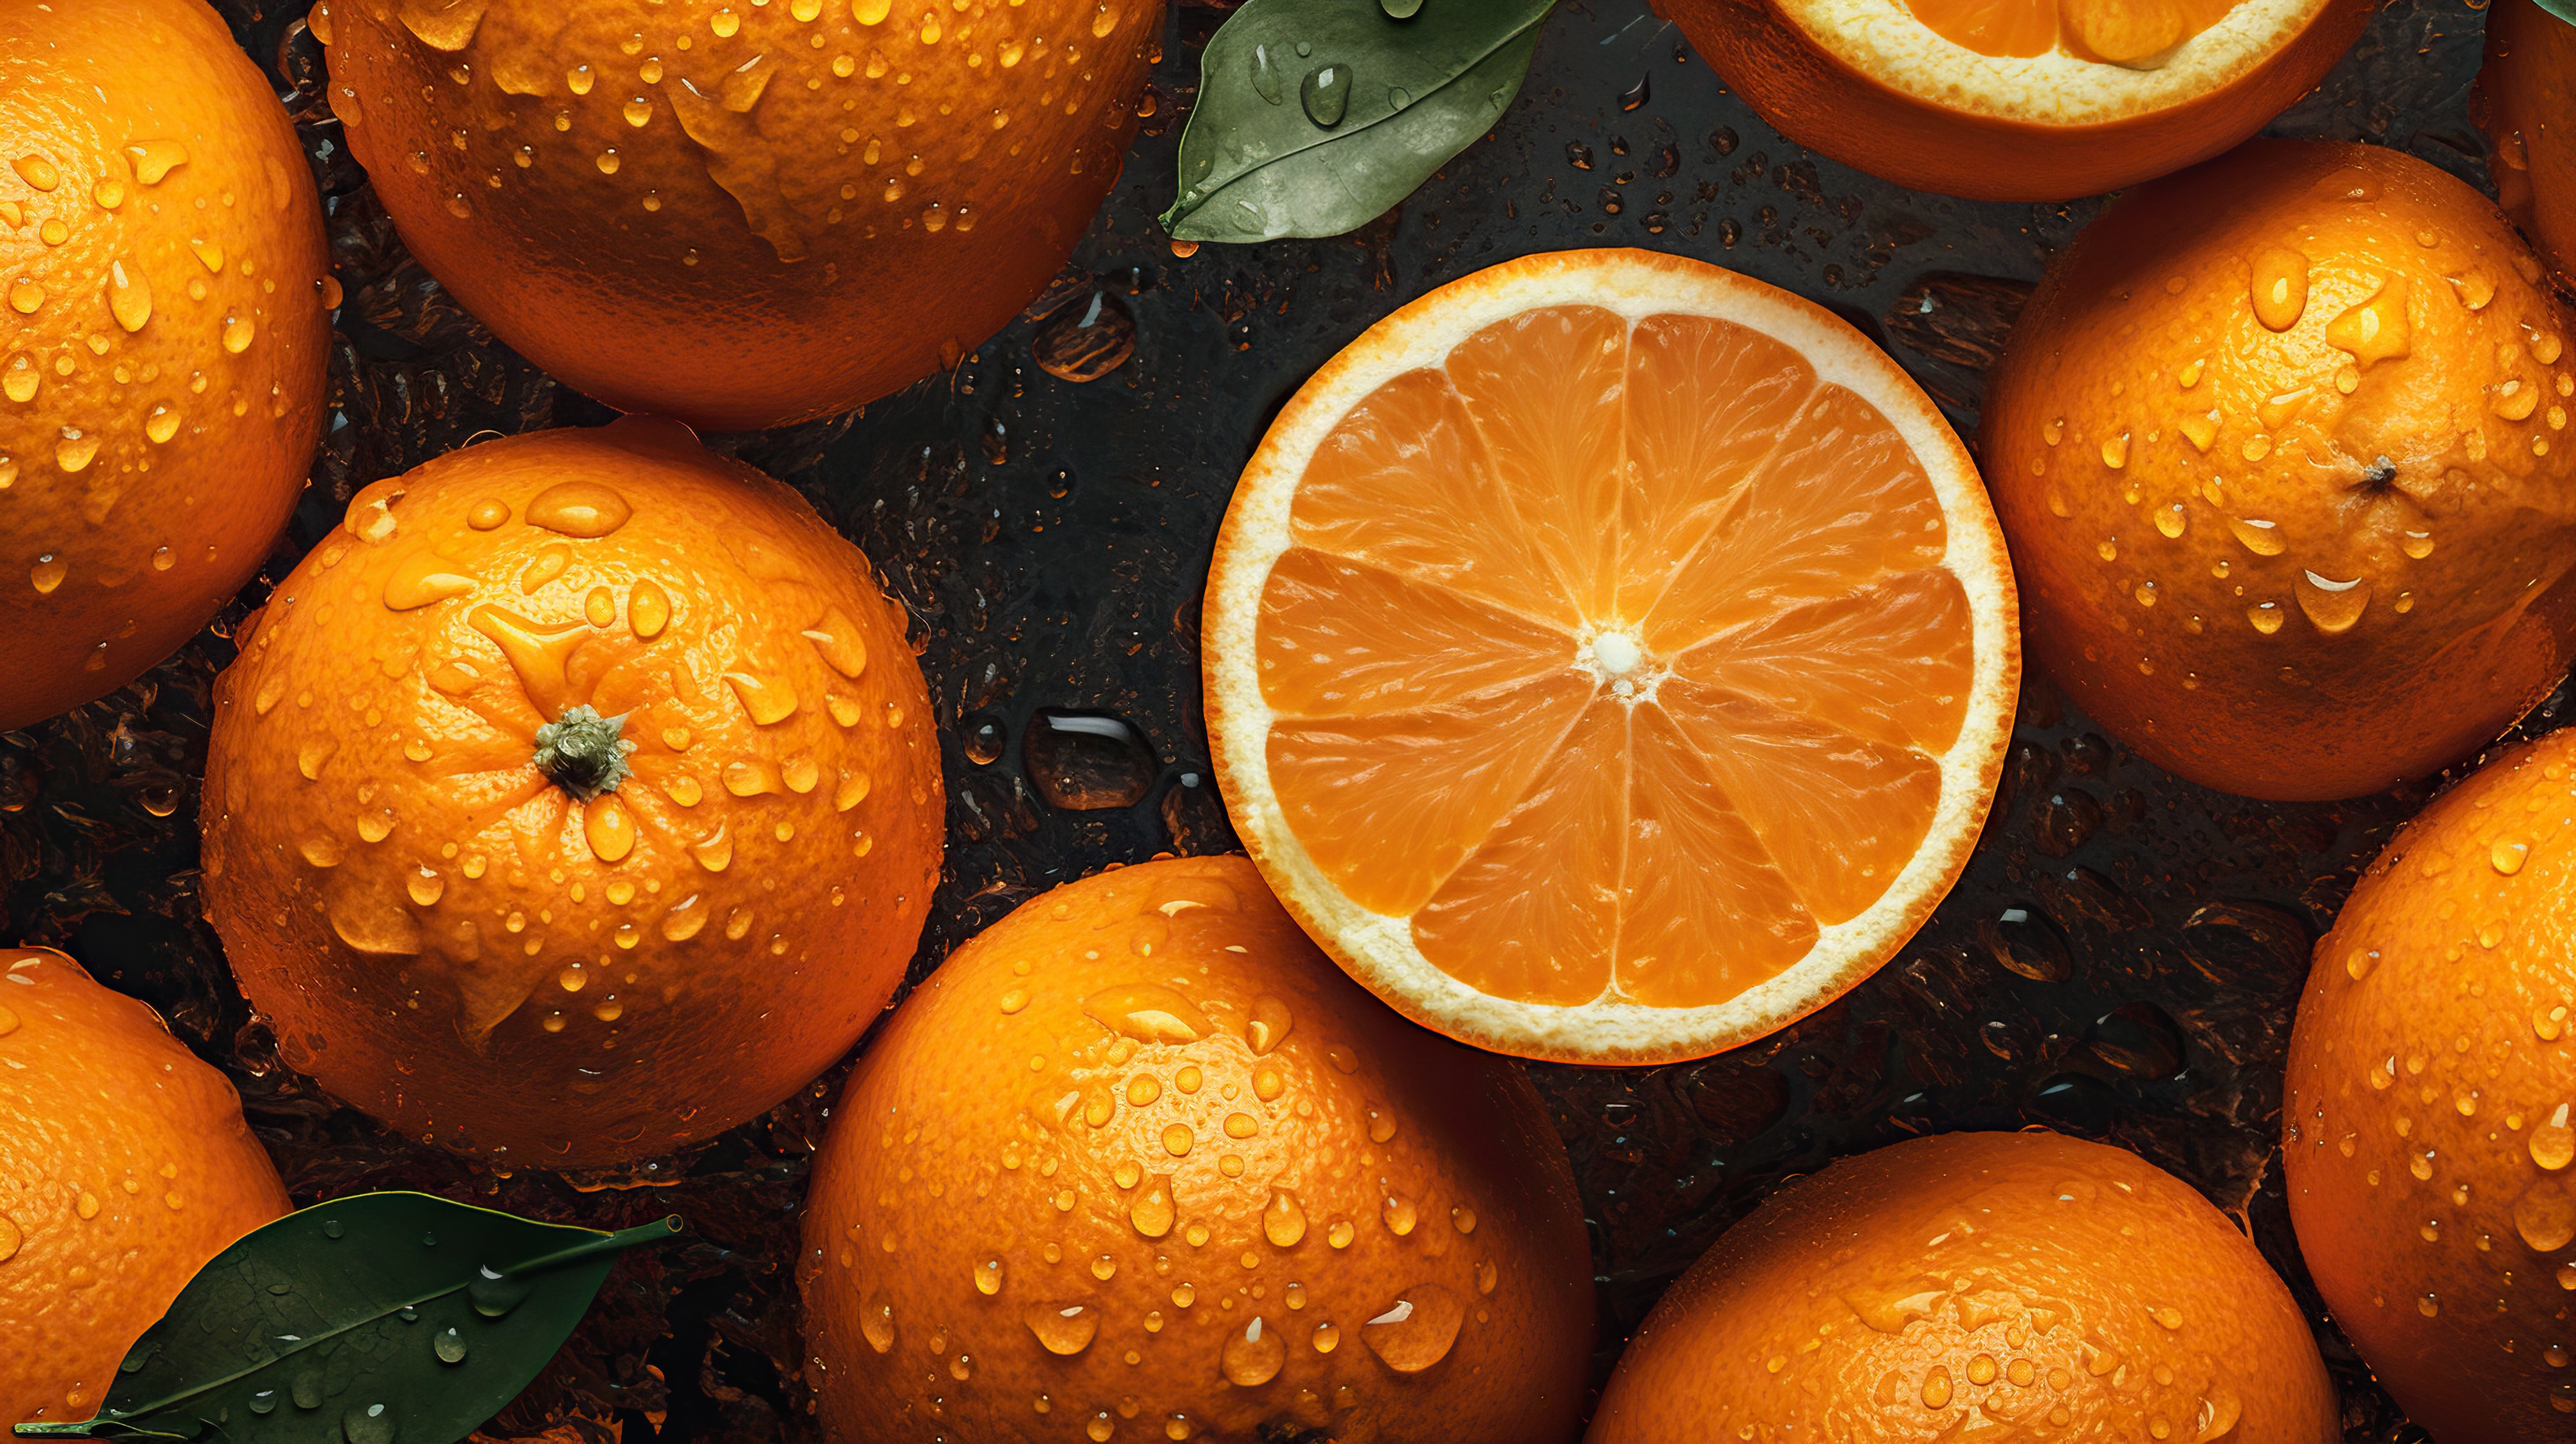 Fresh oranges with droplets on dark background